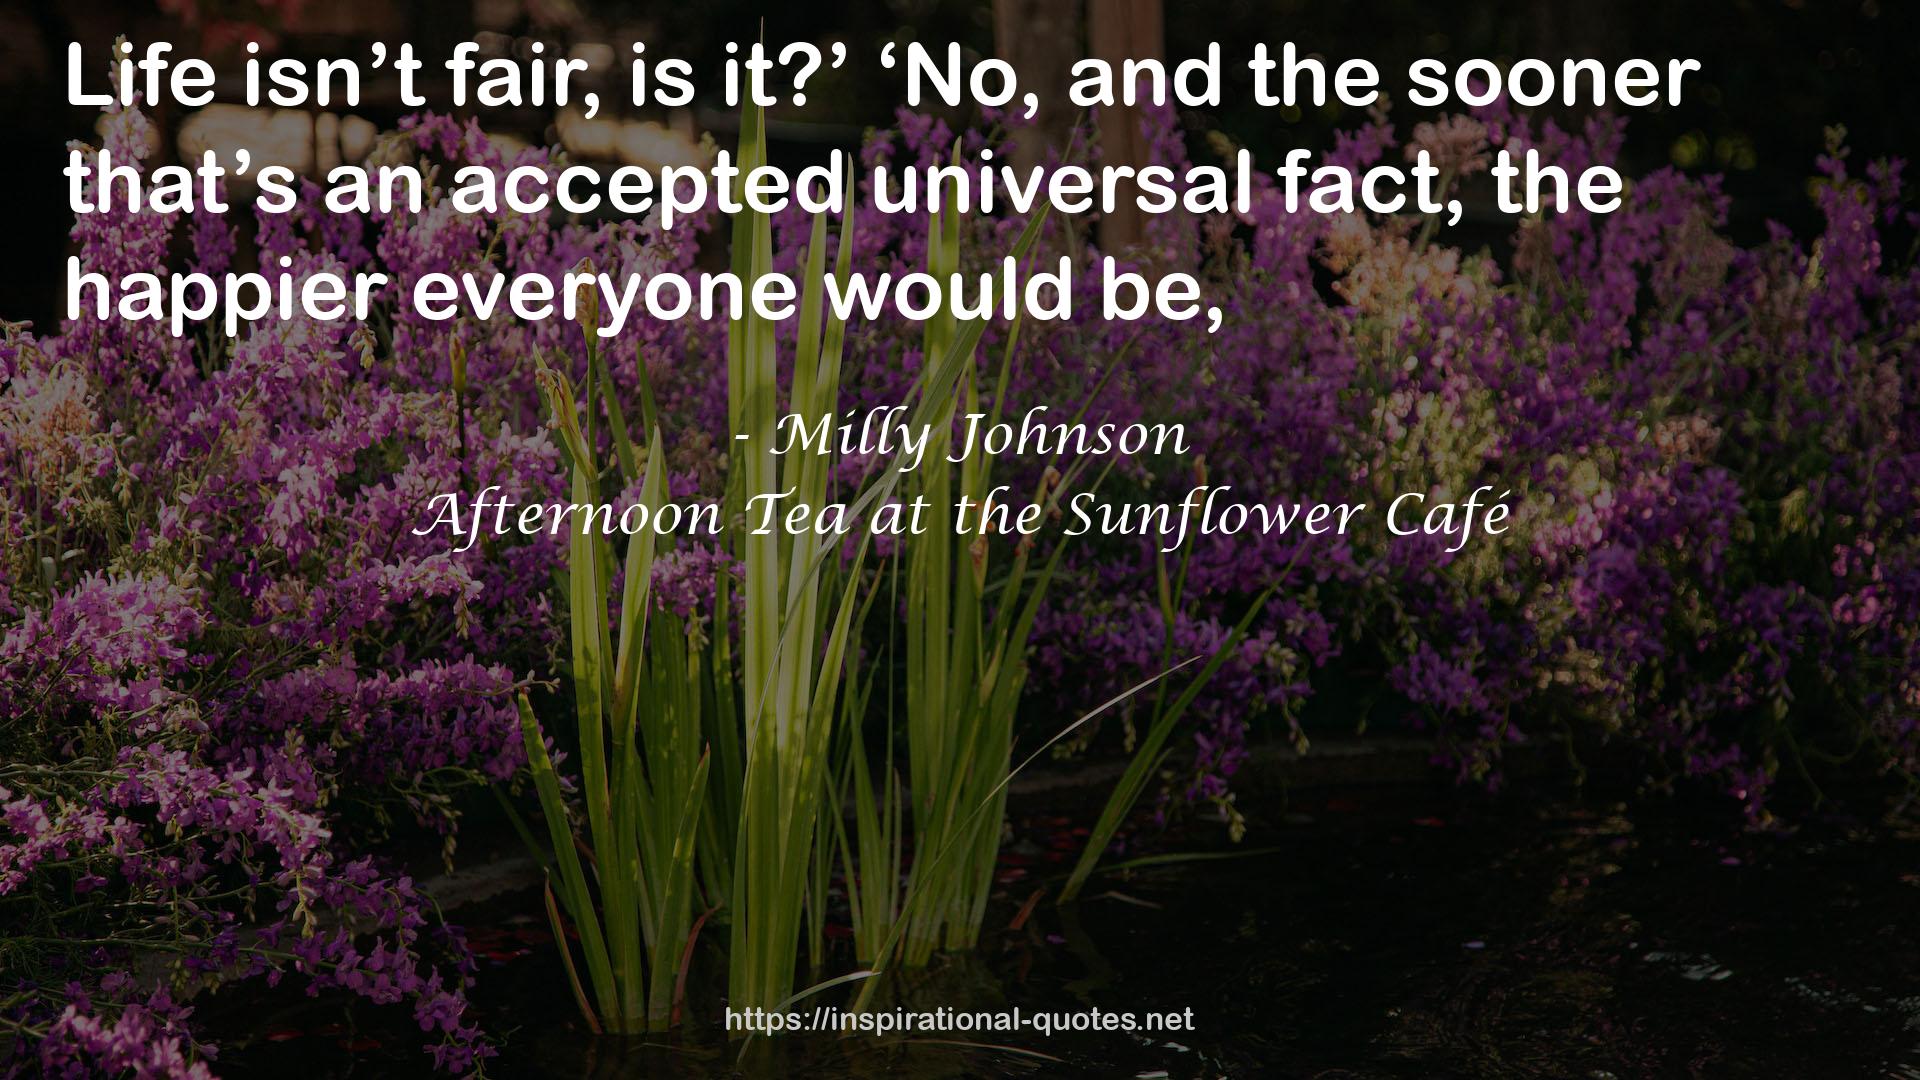 Afternoon Tea at the Sunflower Café QUOTES